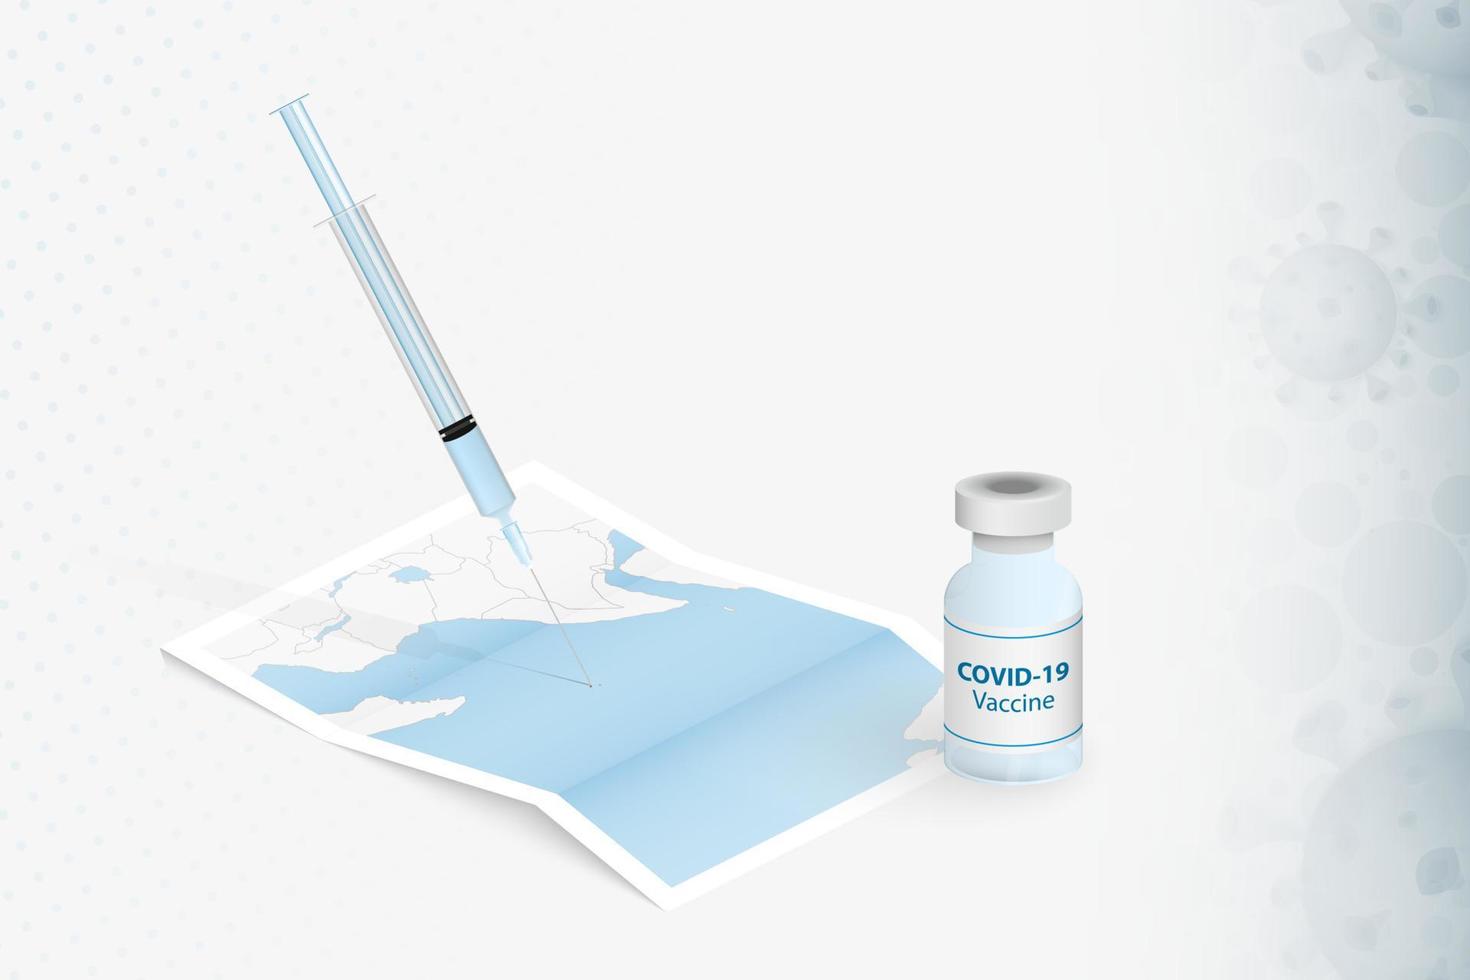 Seychelles Vaccination, Injection with COVID-19 vaccine in Map of Seychelles. vector